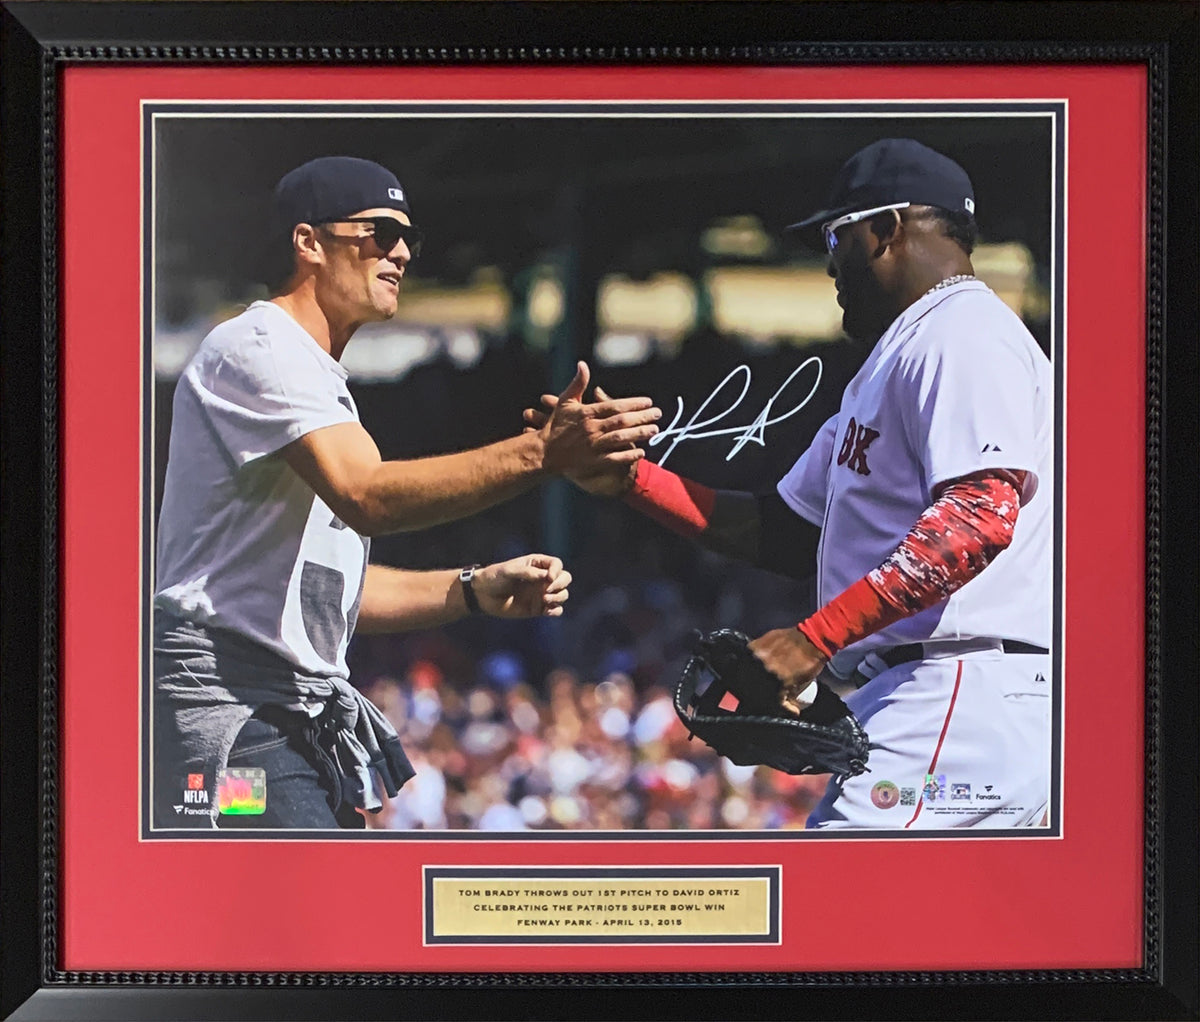 Discounted Boston Red Sox Memorabilia, Autographed Red Sox Jerseys